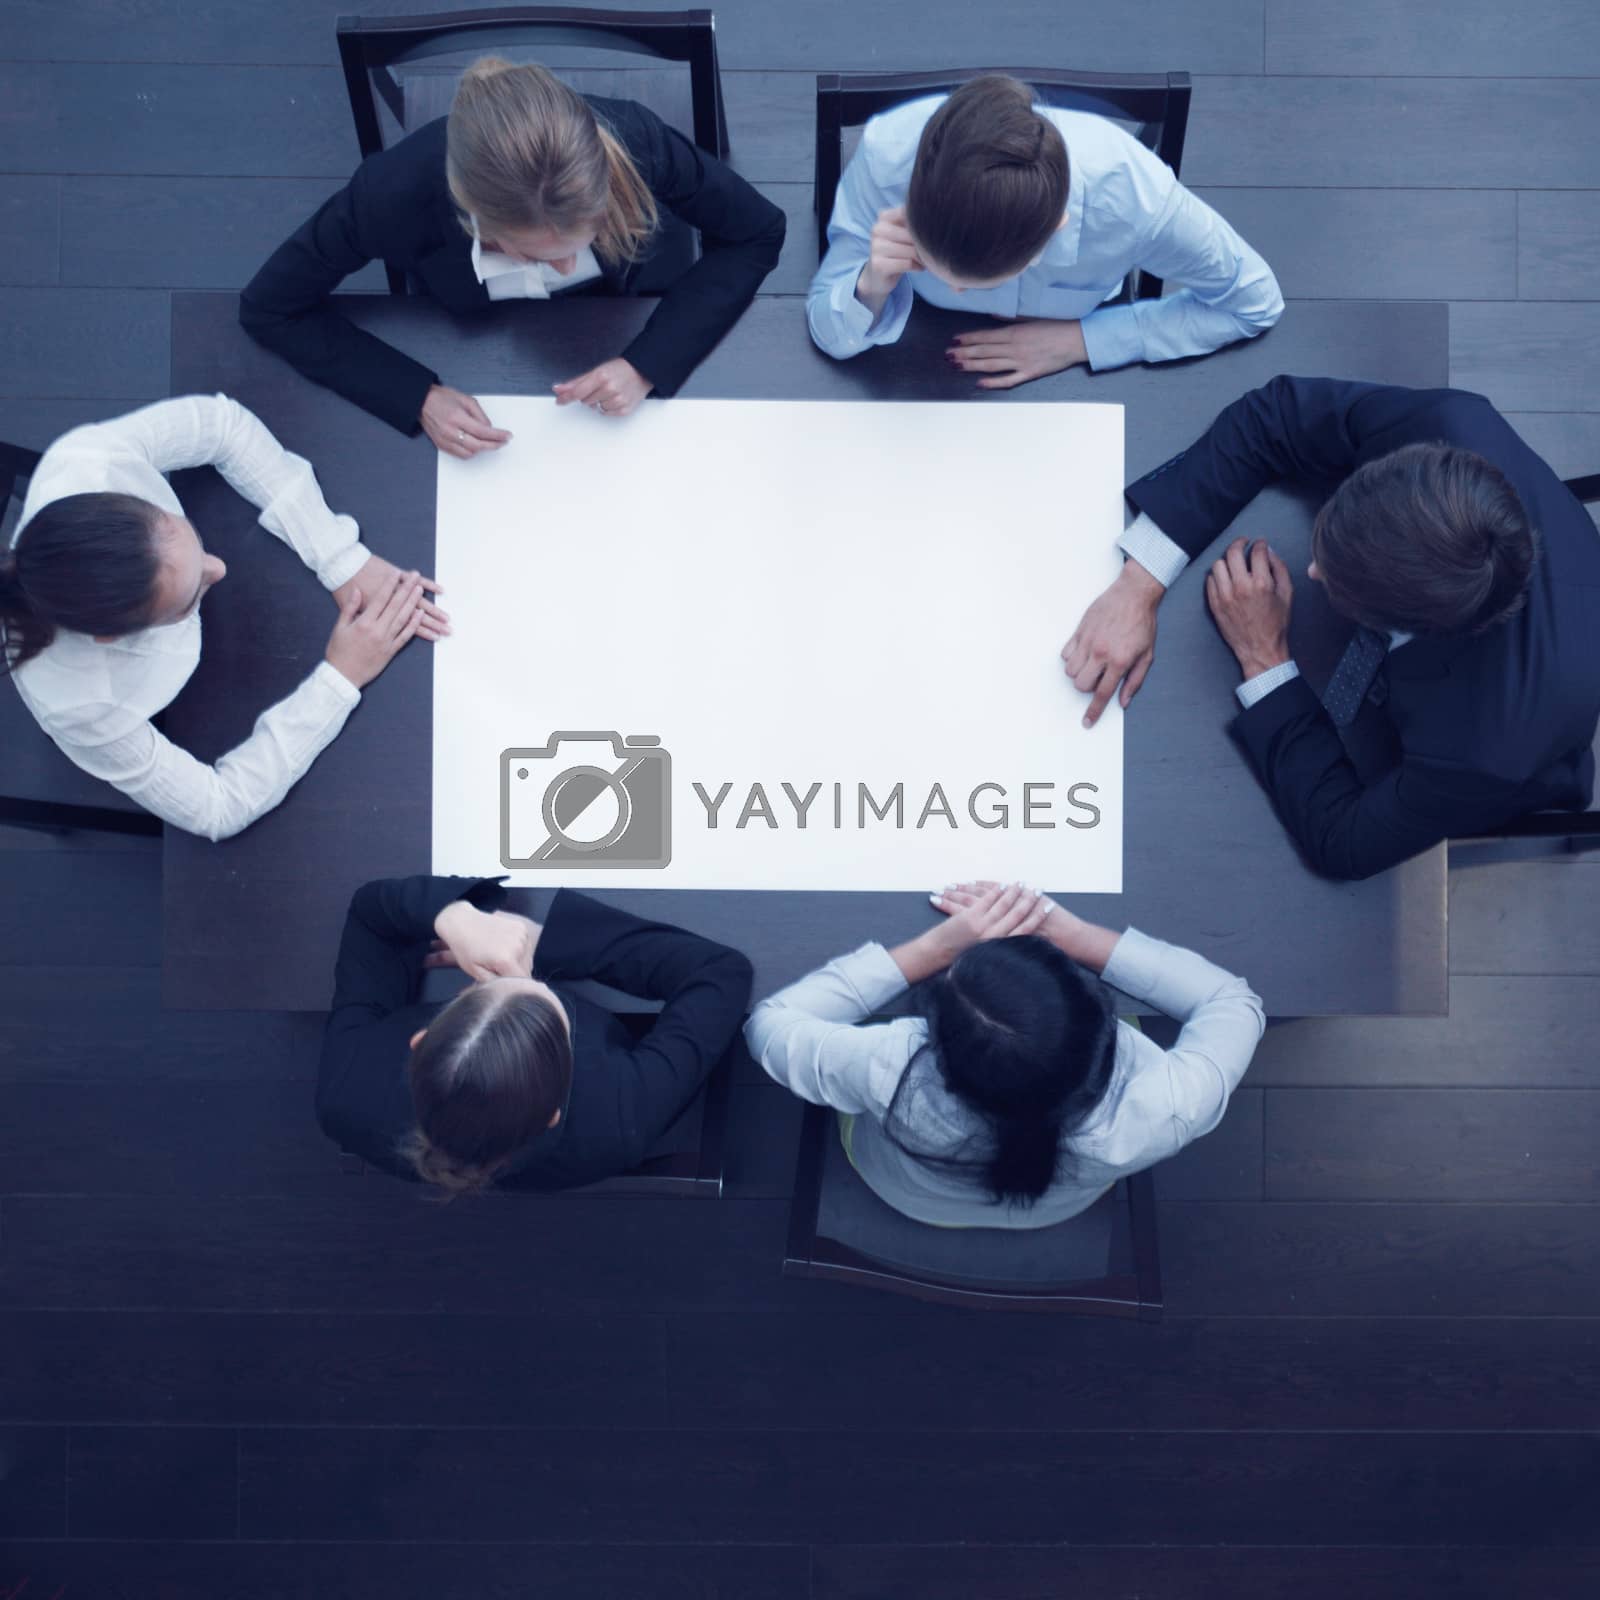 Royalty free image of Business people and blank paper by ALotOfPeople